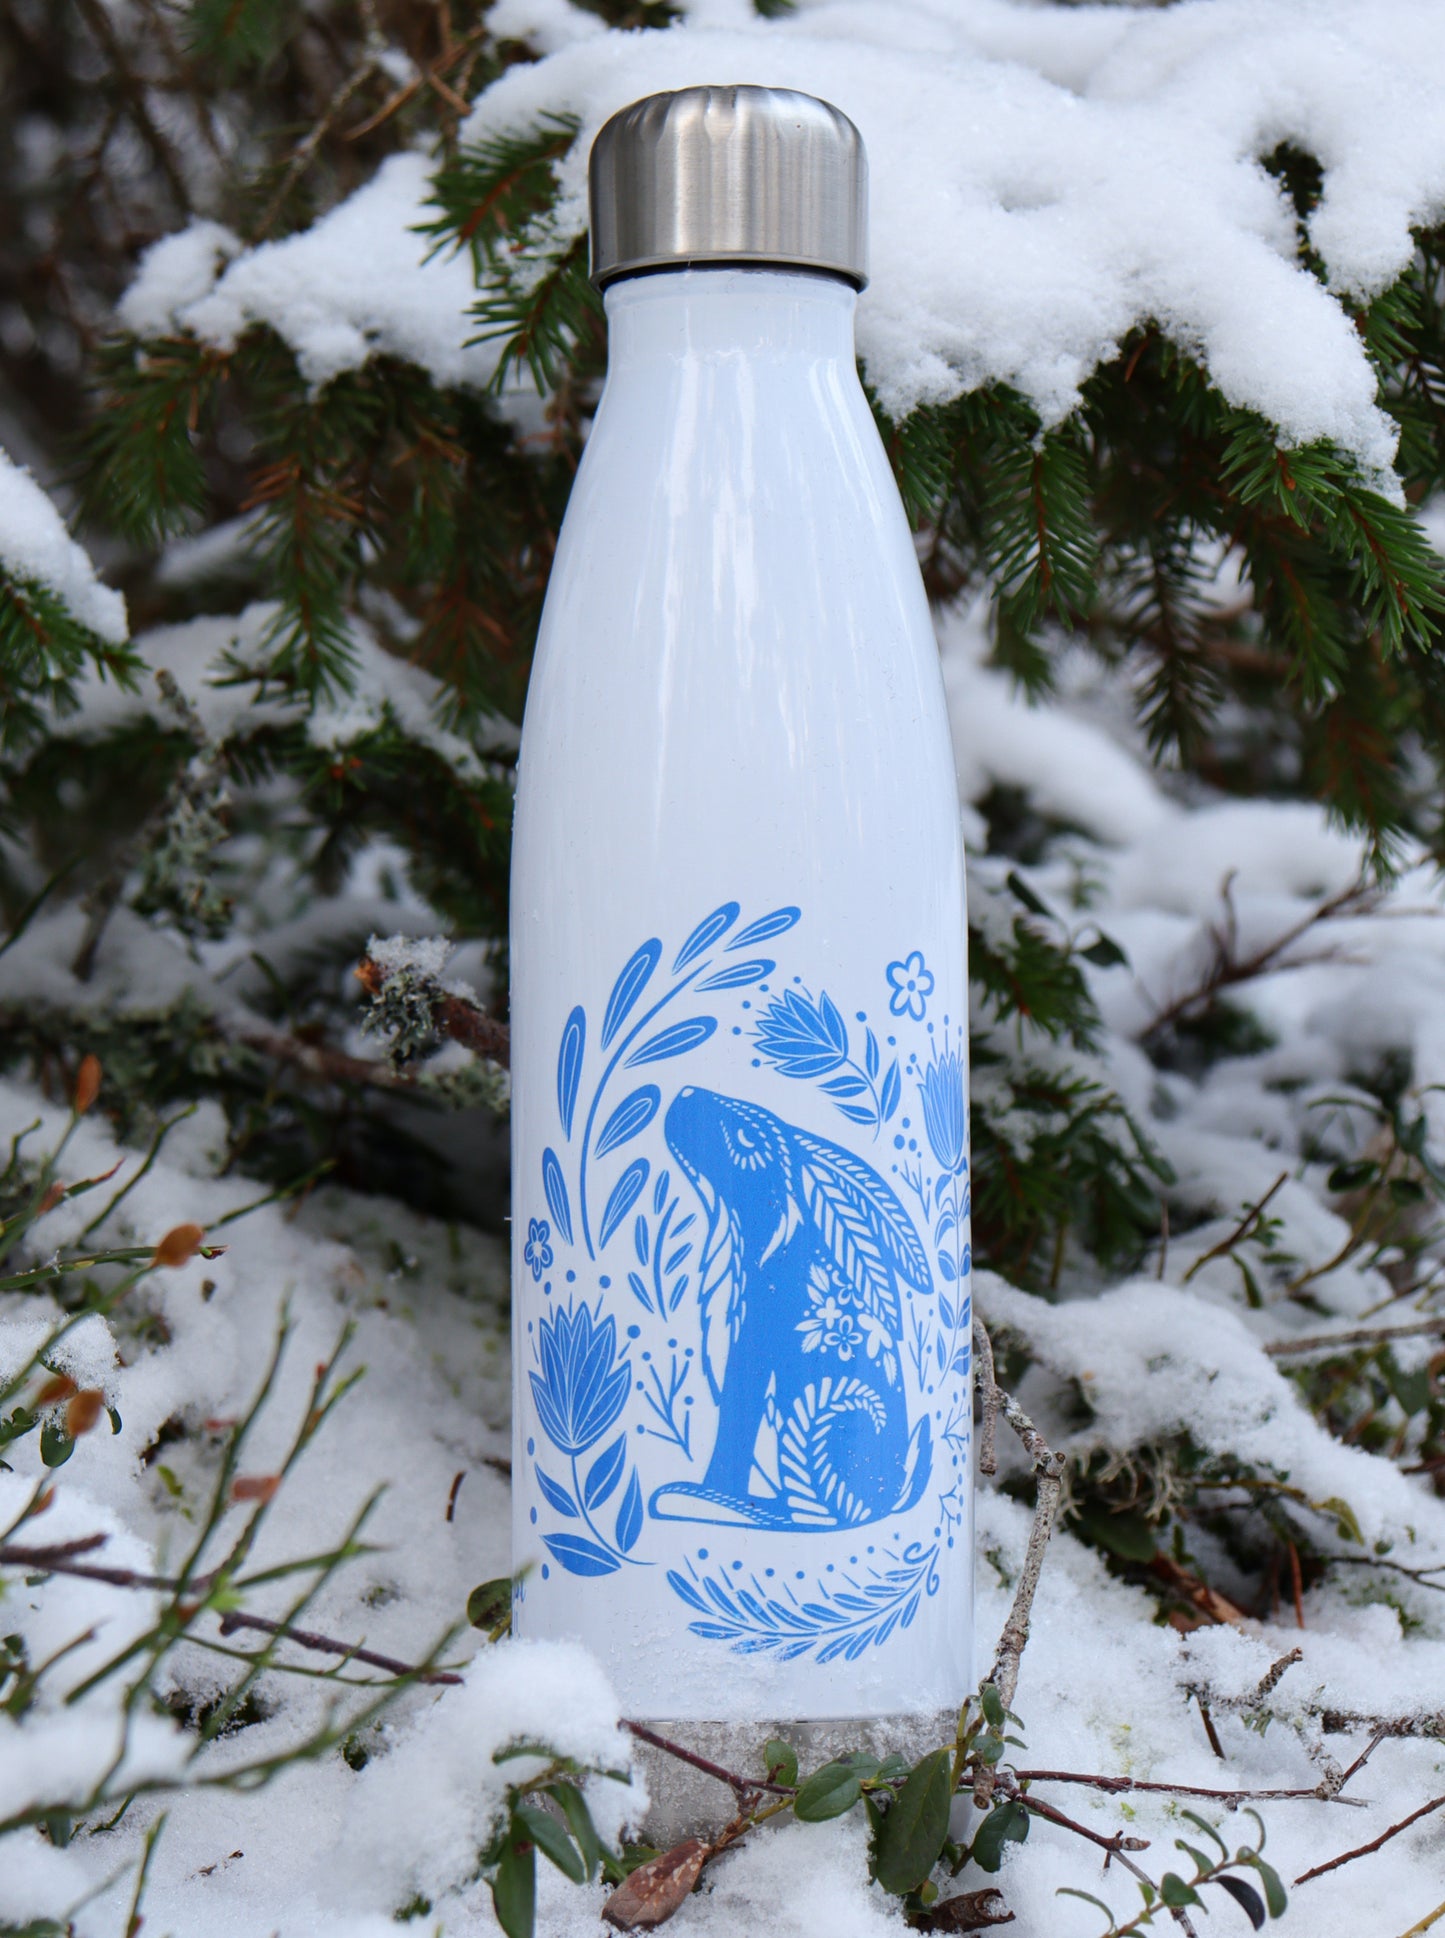 Print n stuff the bunny forest fairytales metallic water bottle thermo bottle for outdoors turku Finland 